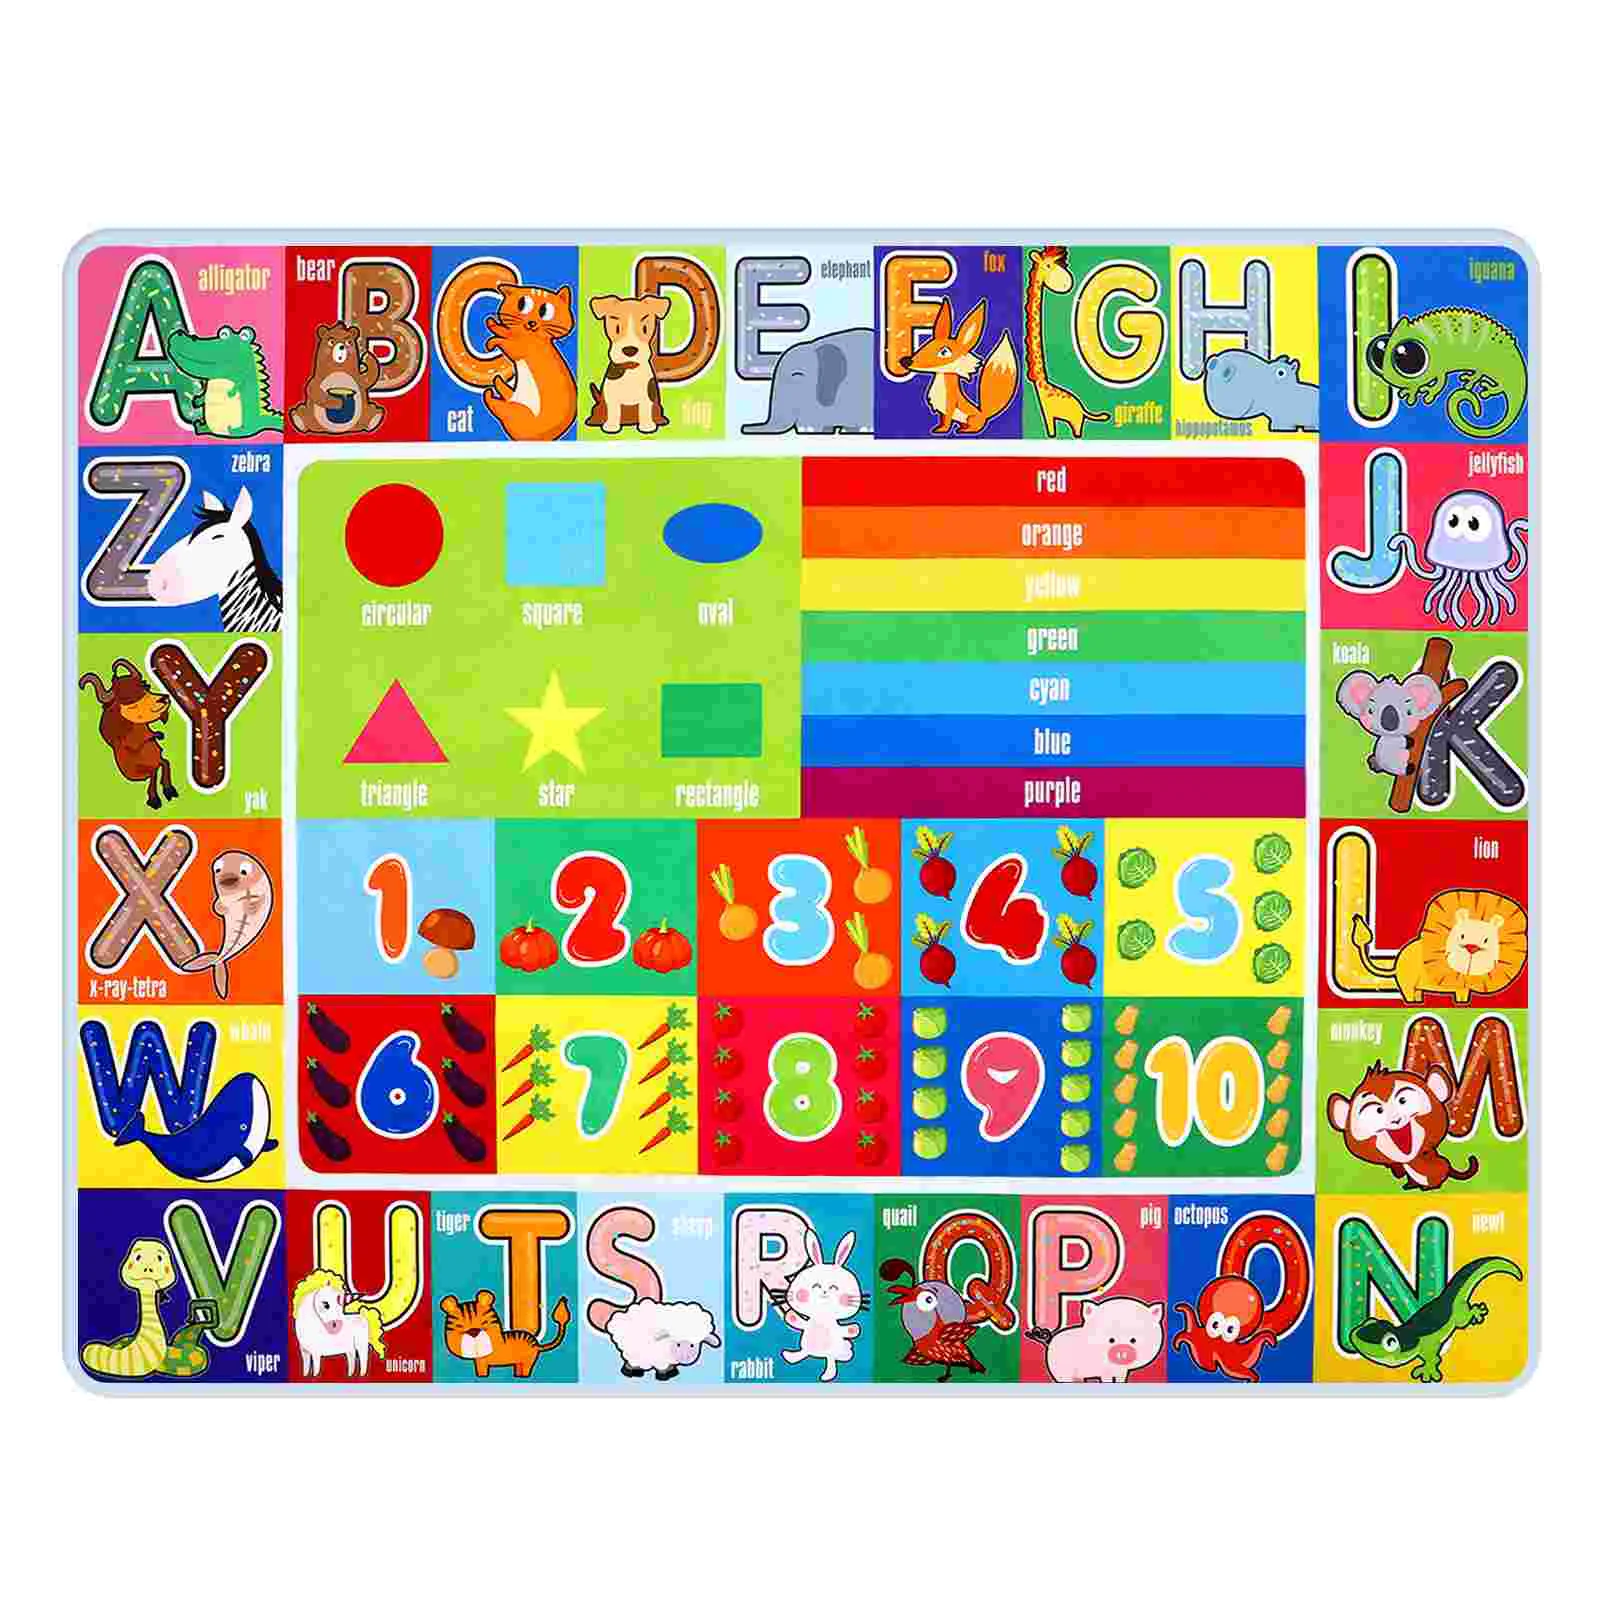 

Kids Rugs For Playroom Kids Toddler Ornament Play Mats For Babies And Toddlers Alphabet Rug Floor Carpet Children's